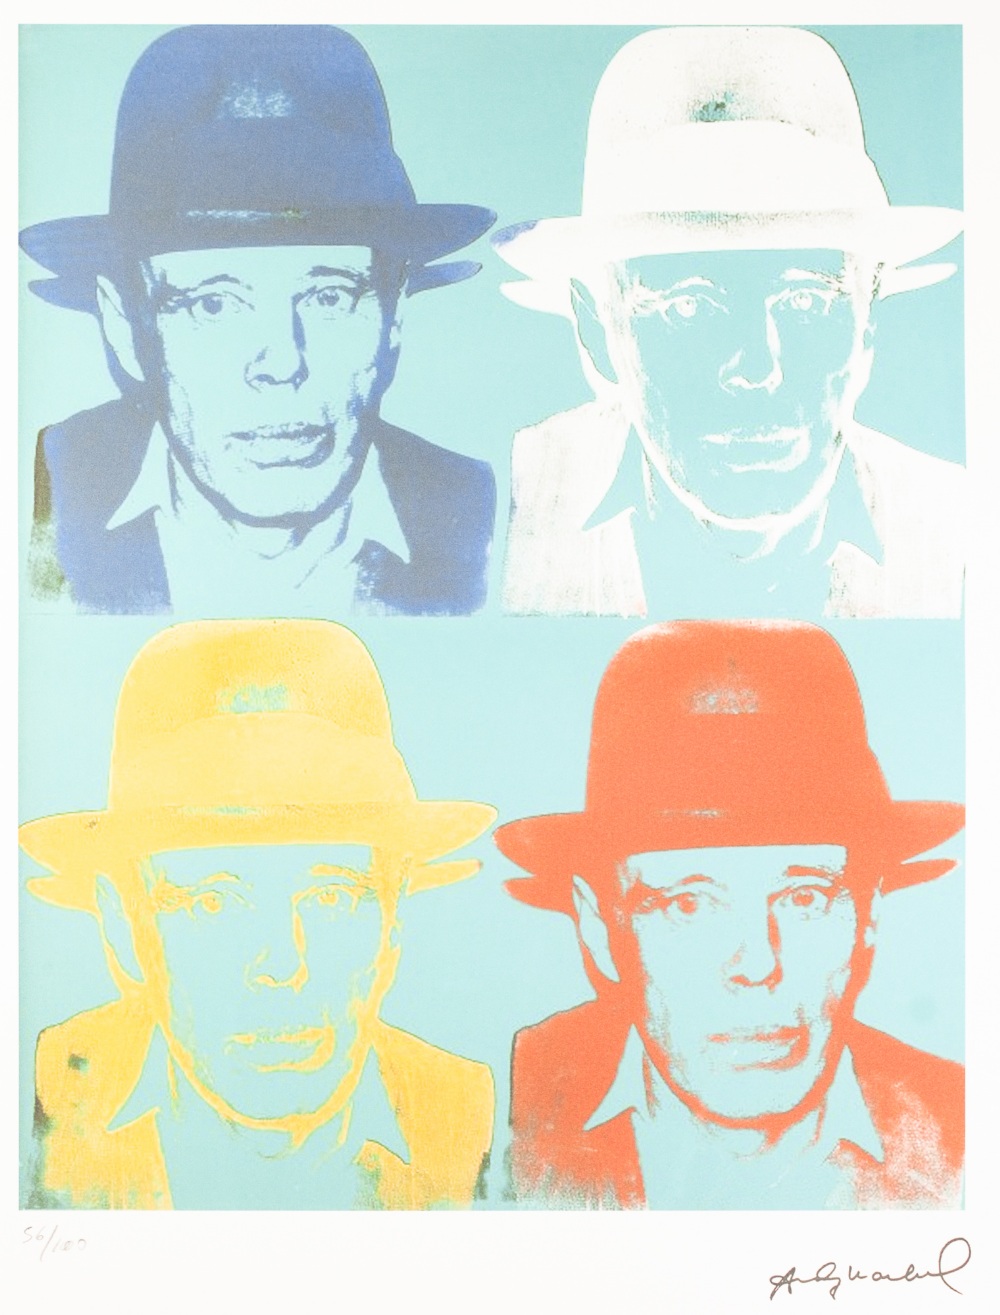 ANDY WARHOL (AMERICAN 1928 - 1987) COLOURED LITHGRAPHIC PRINT ON ARCHES PAPER 'Four self potrait